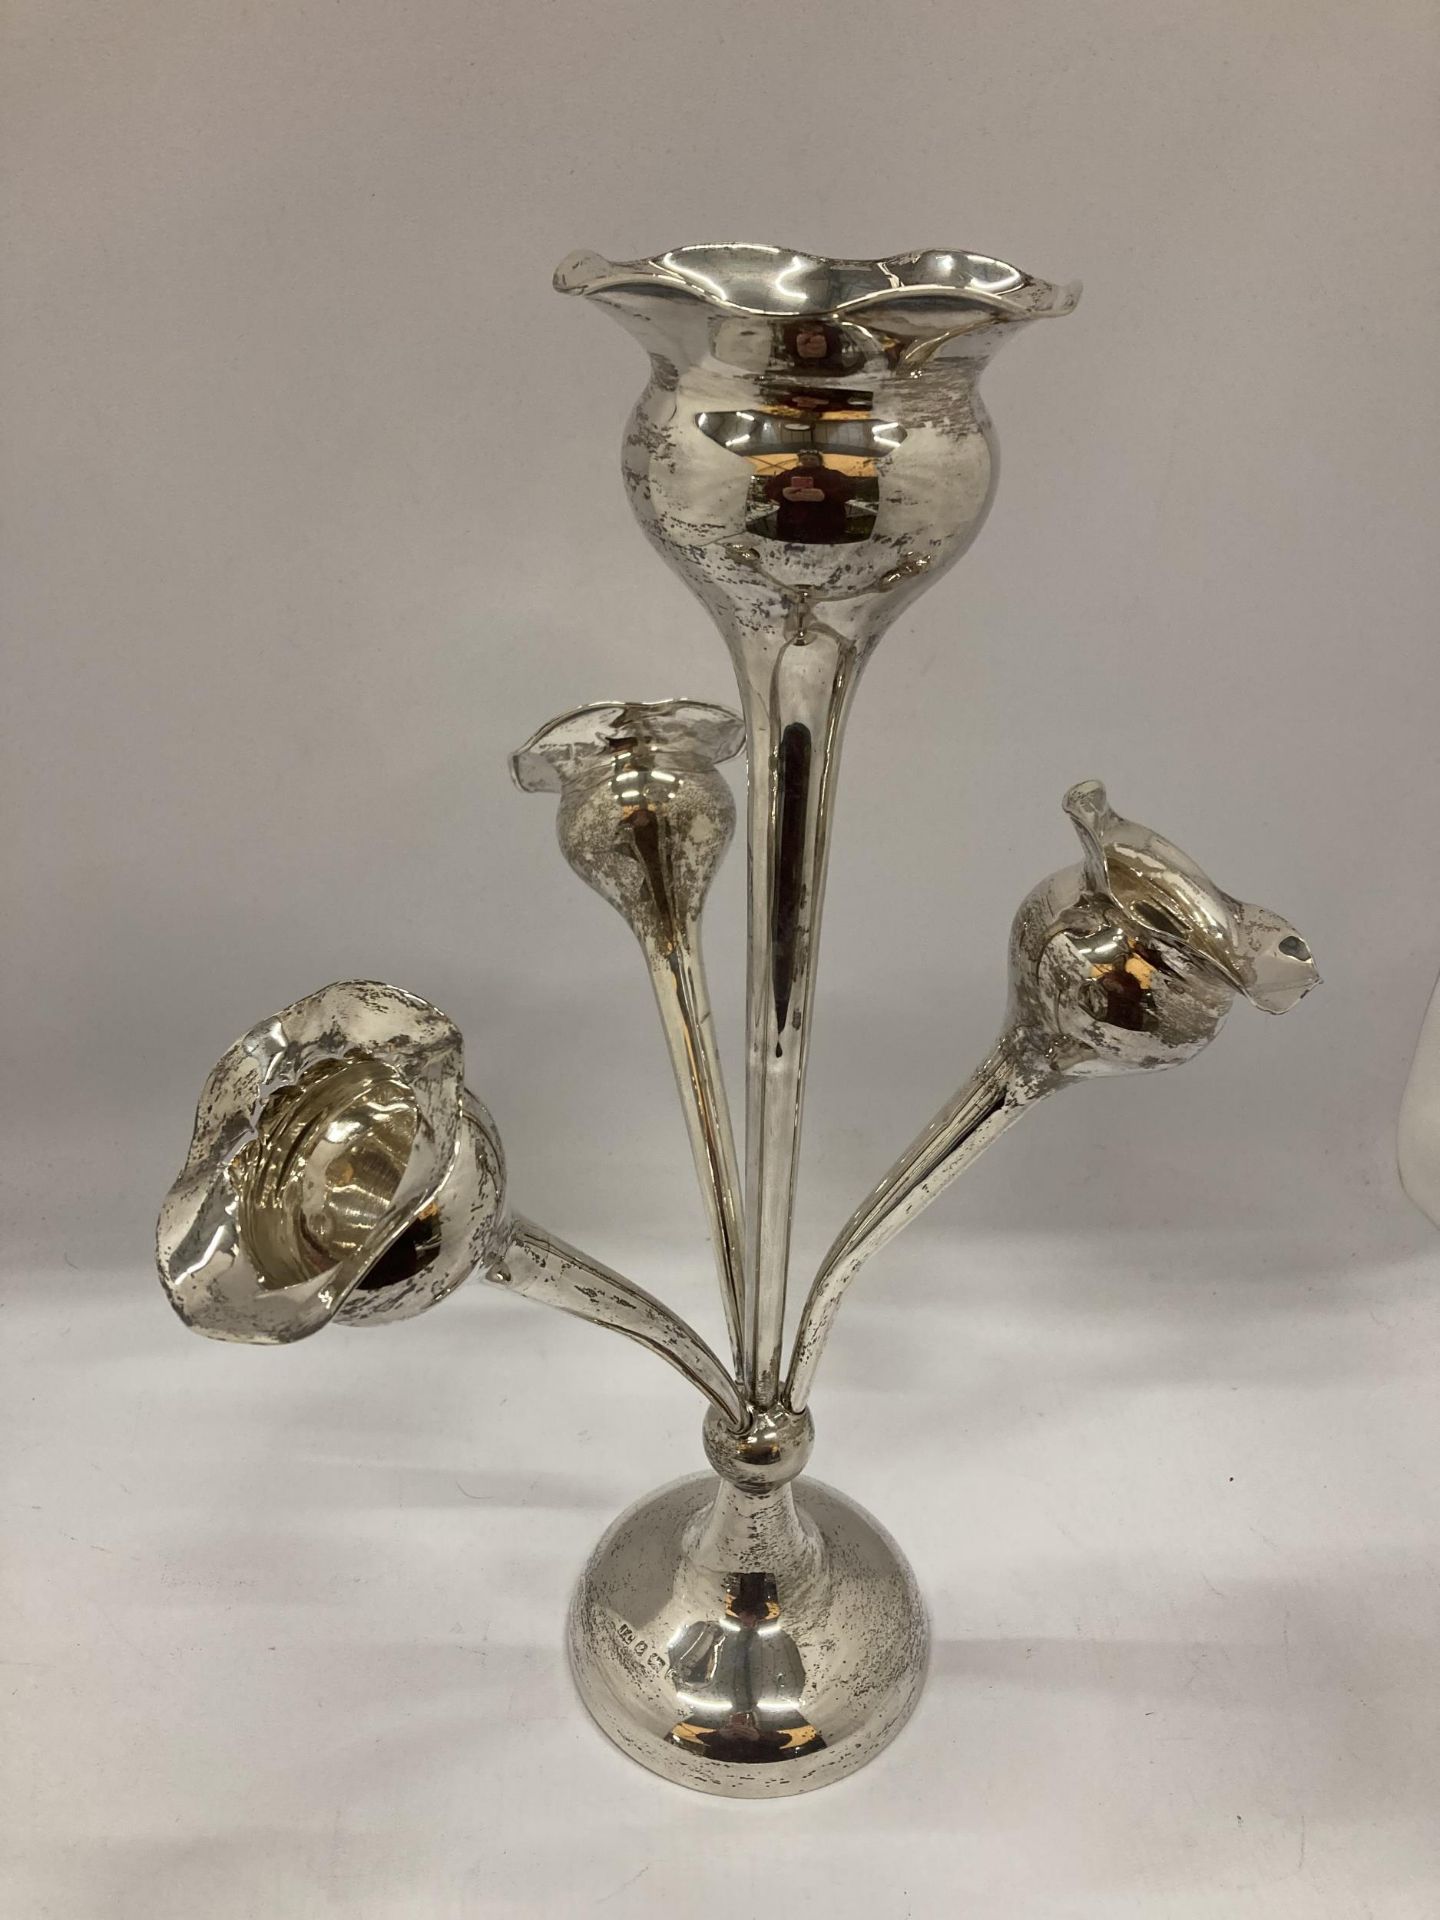 AN EARLY 20TH CENTURY BIRMINGHAM HALLMARKED SILVER EPERGNE WITH THREE DETACHABLE POSIES, MAKER J. - Image 2 of 4